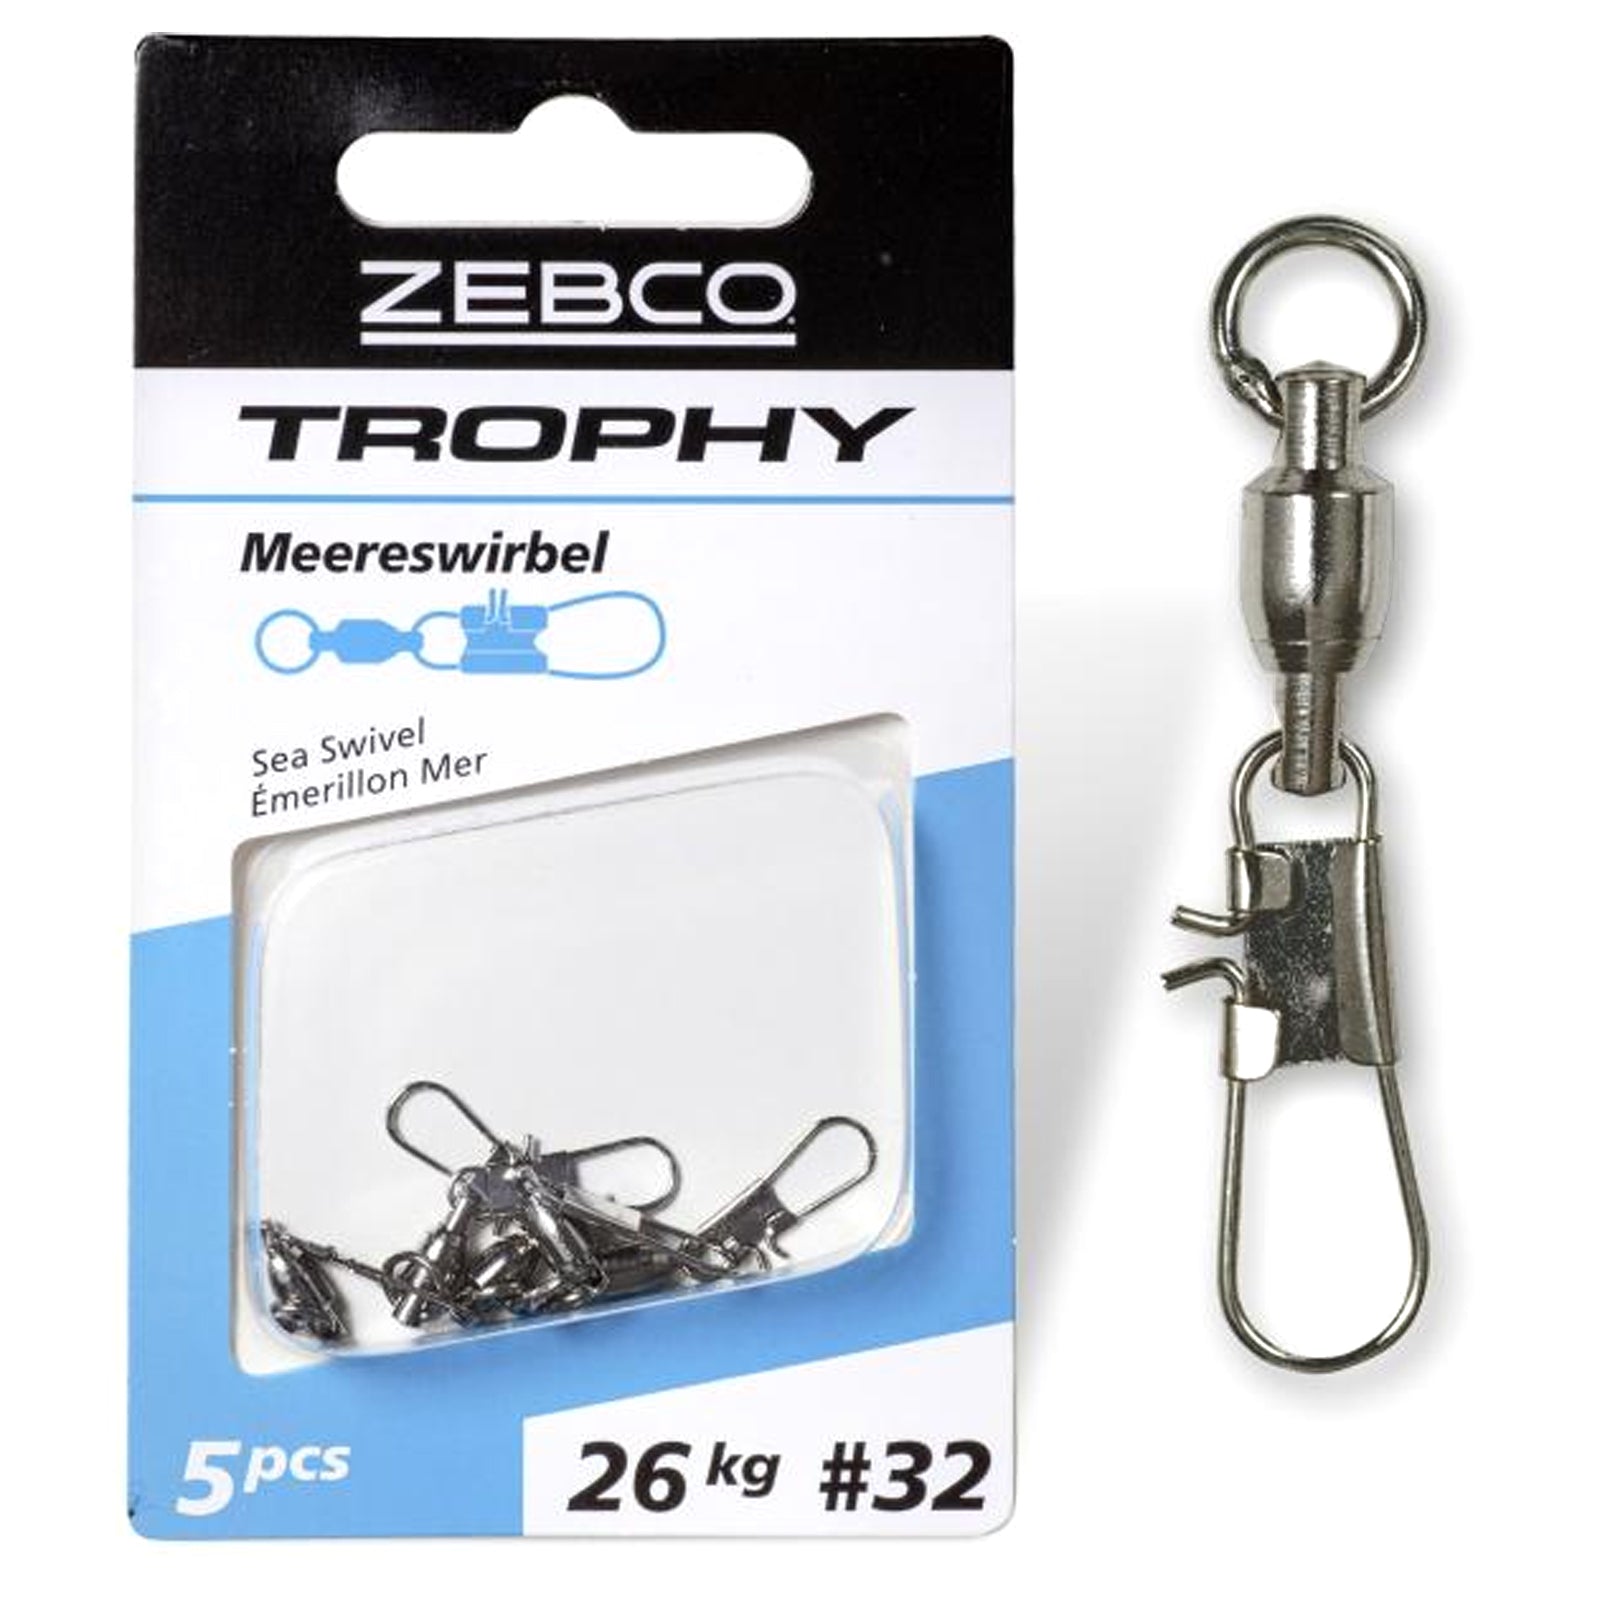 Zebco Trophy Sea Swivel Pack of 5 for Fishing